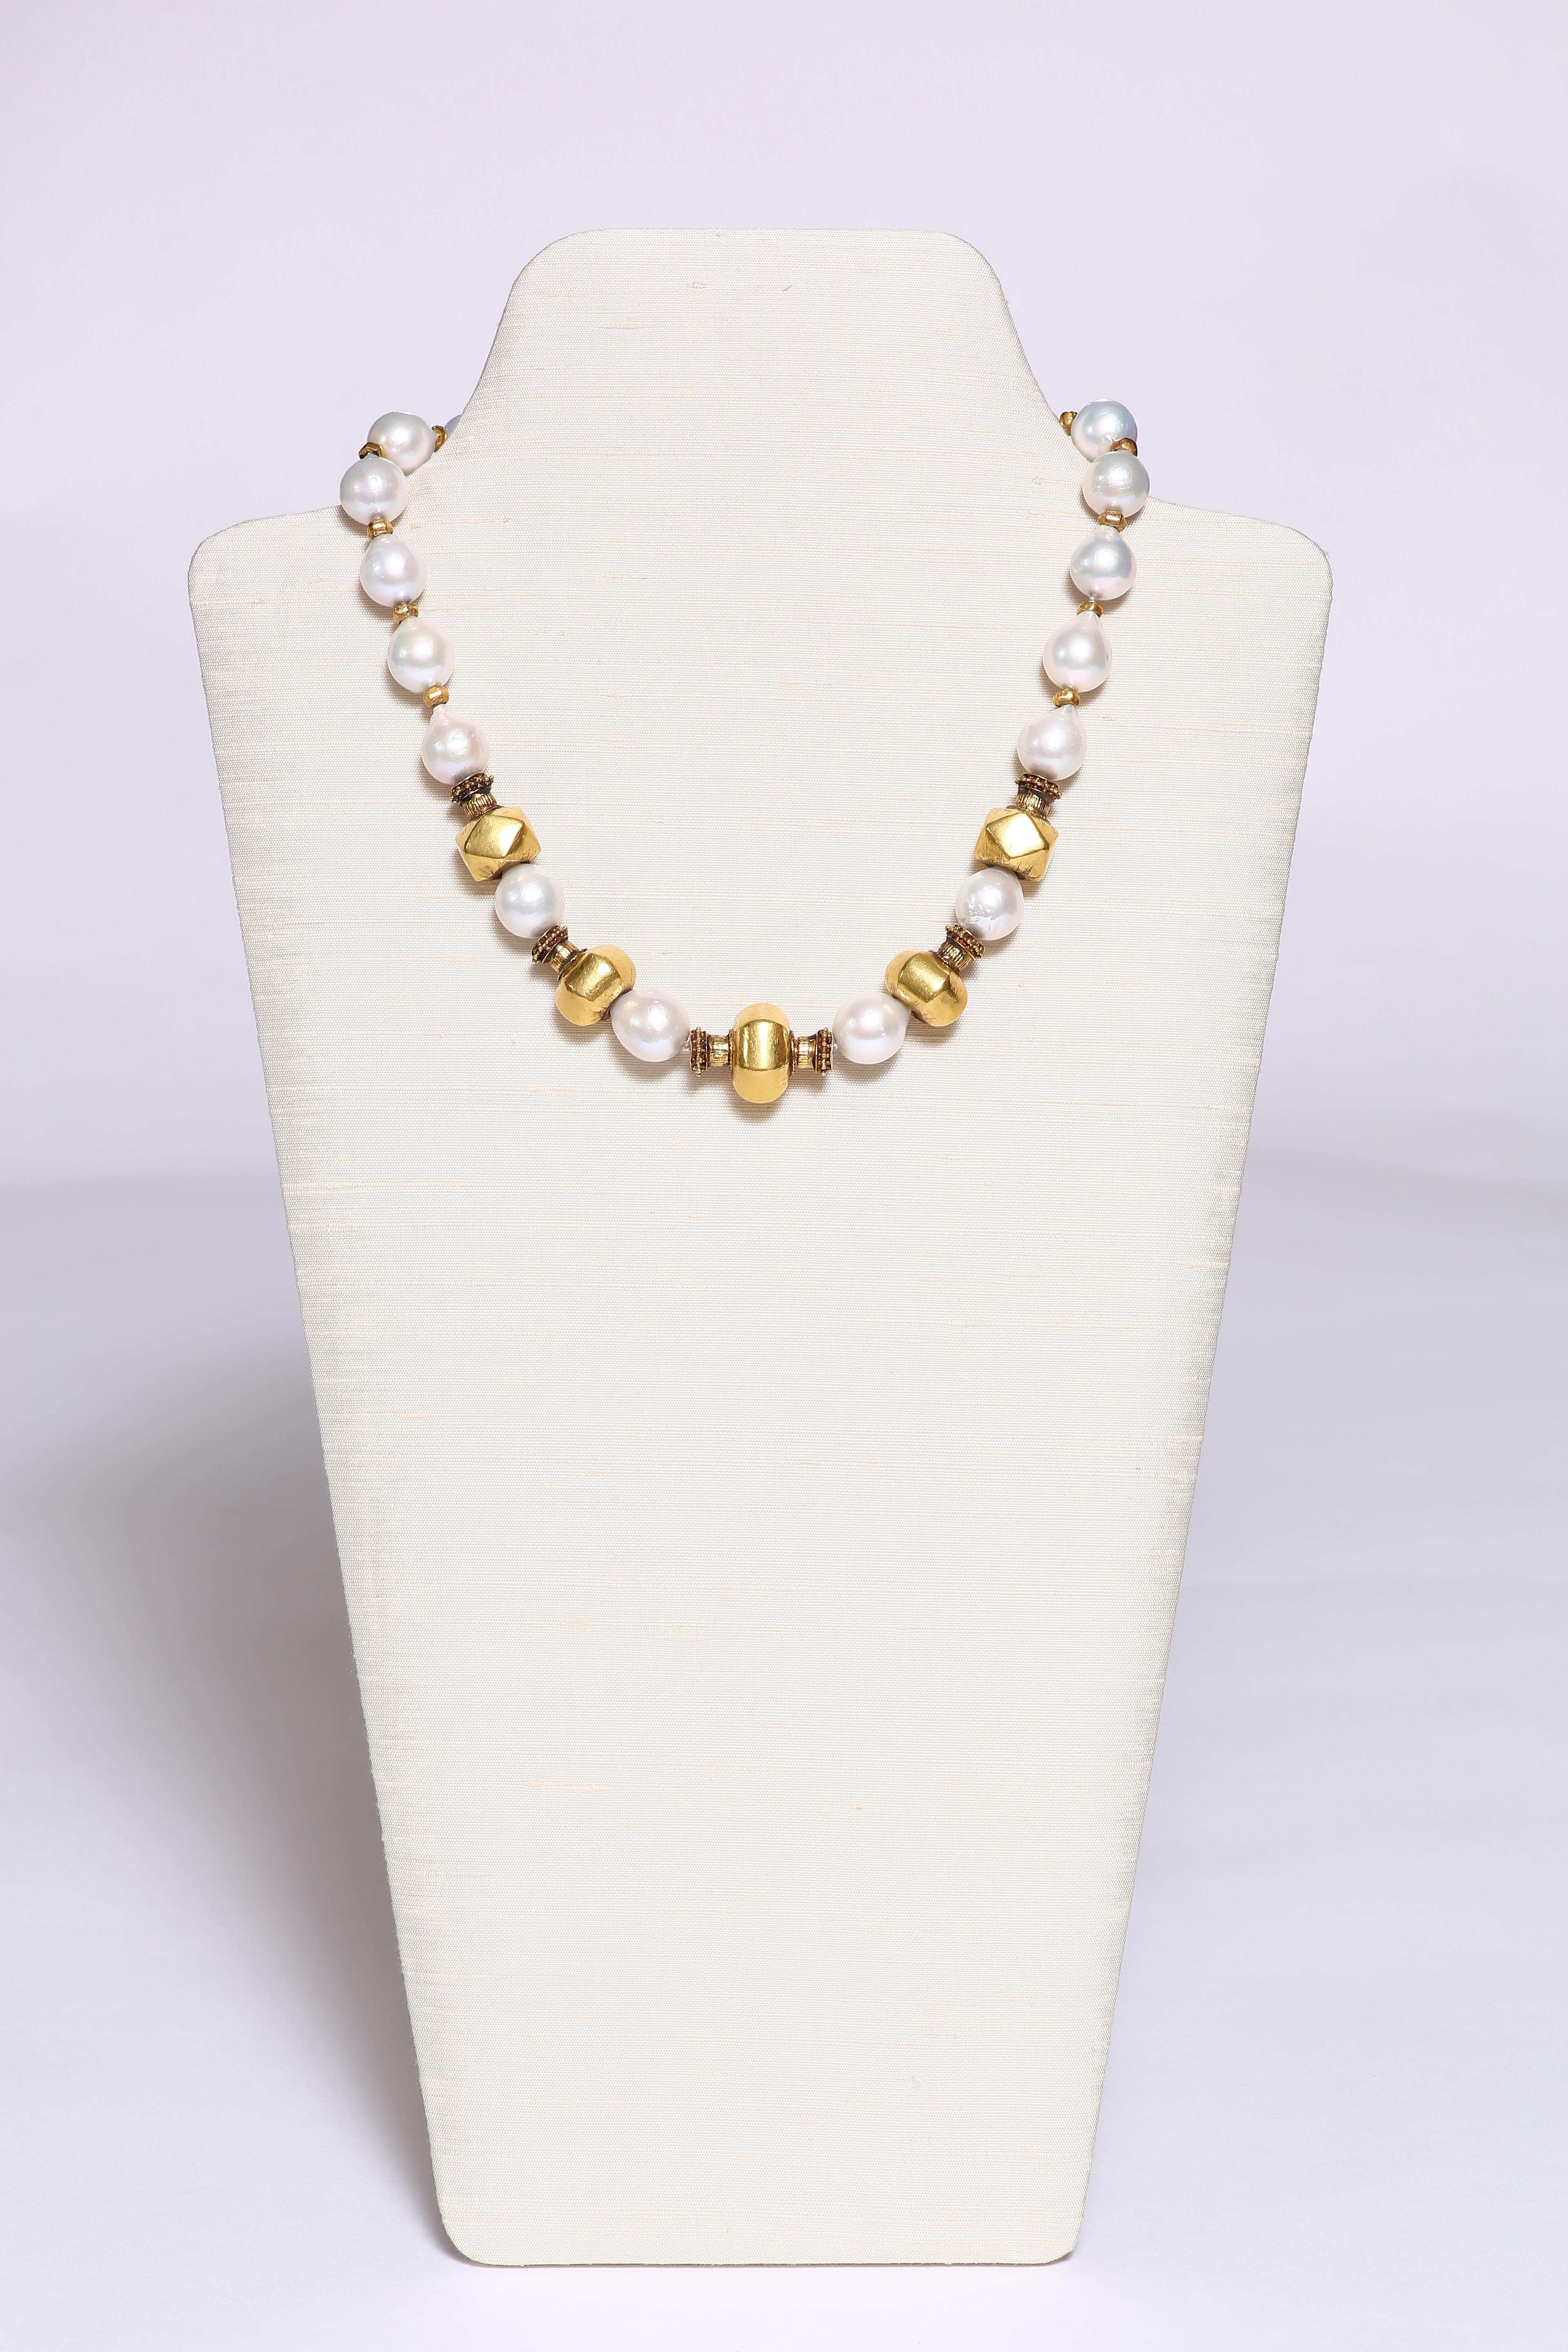 Five lustrous large old wax gold beads are accentuated by wonderful baroque freshwater pearls. The pearls continue to form the necklace with small faceted gold beads in between each pearl. The necklace is 19